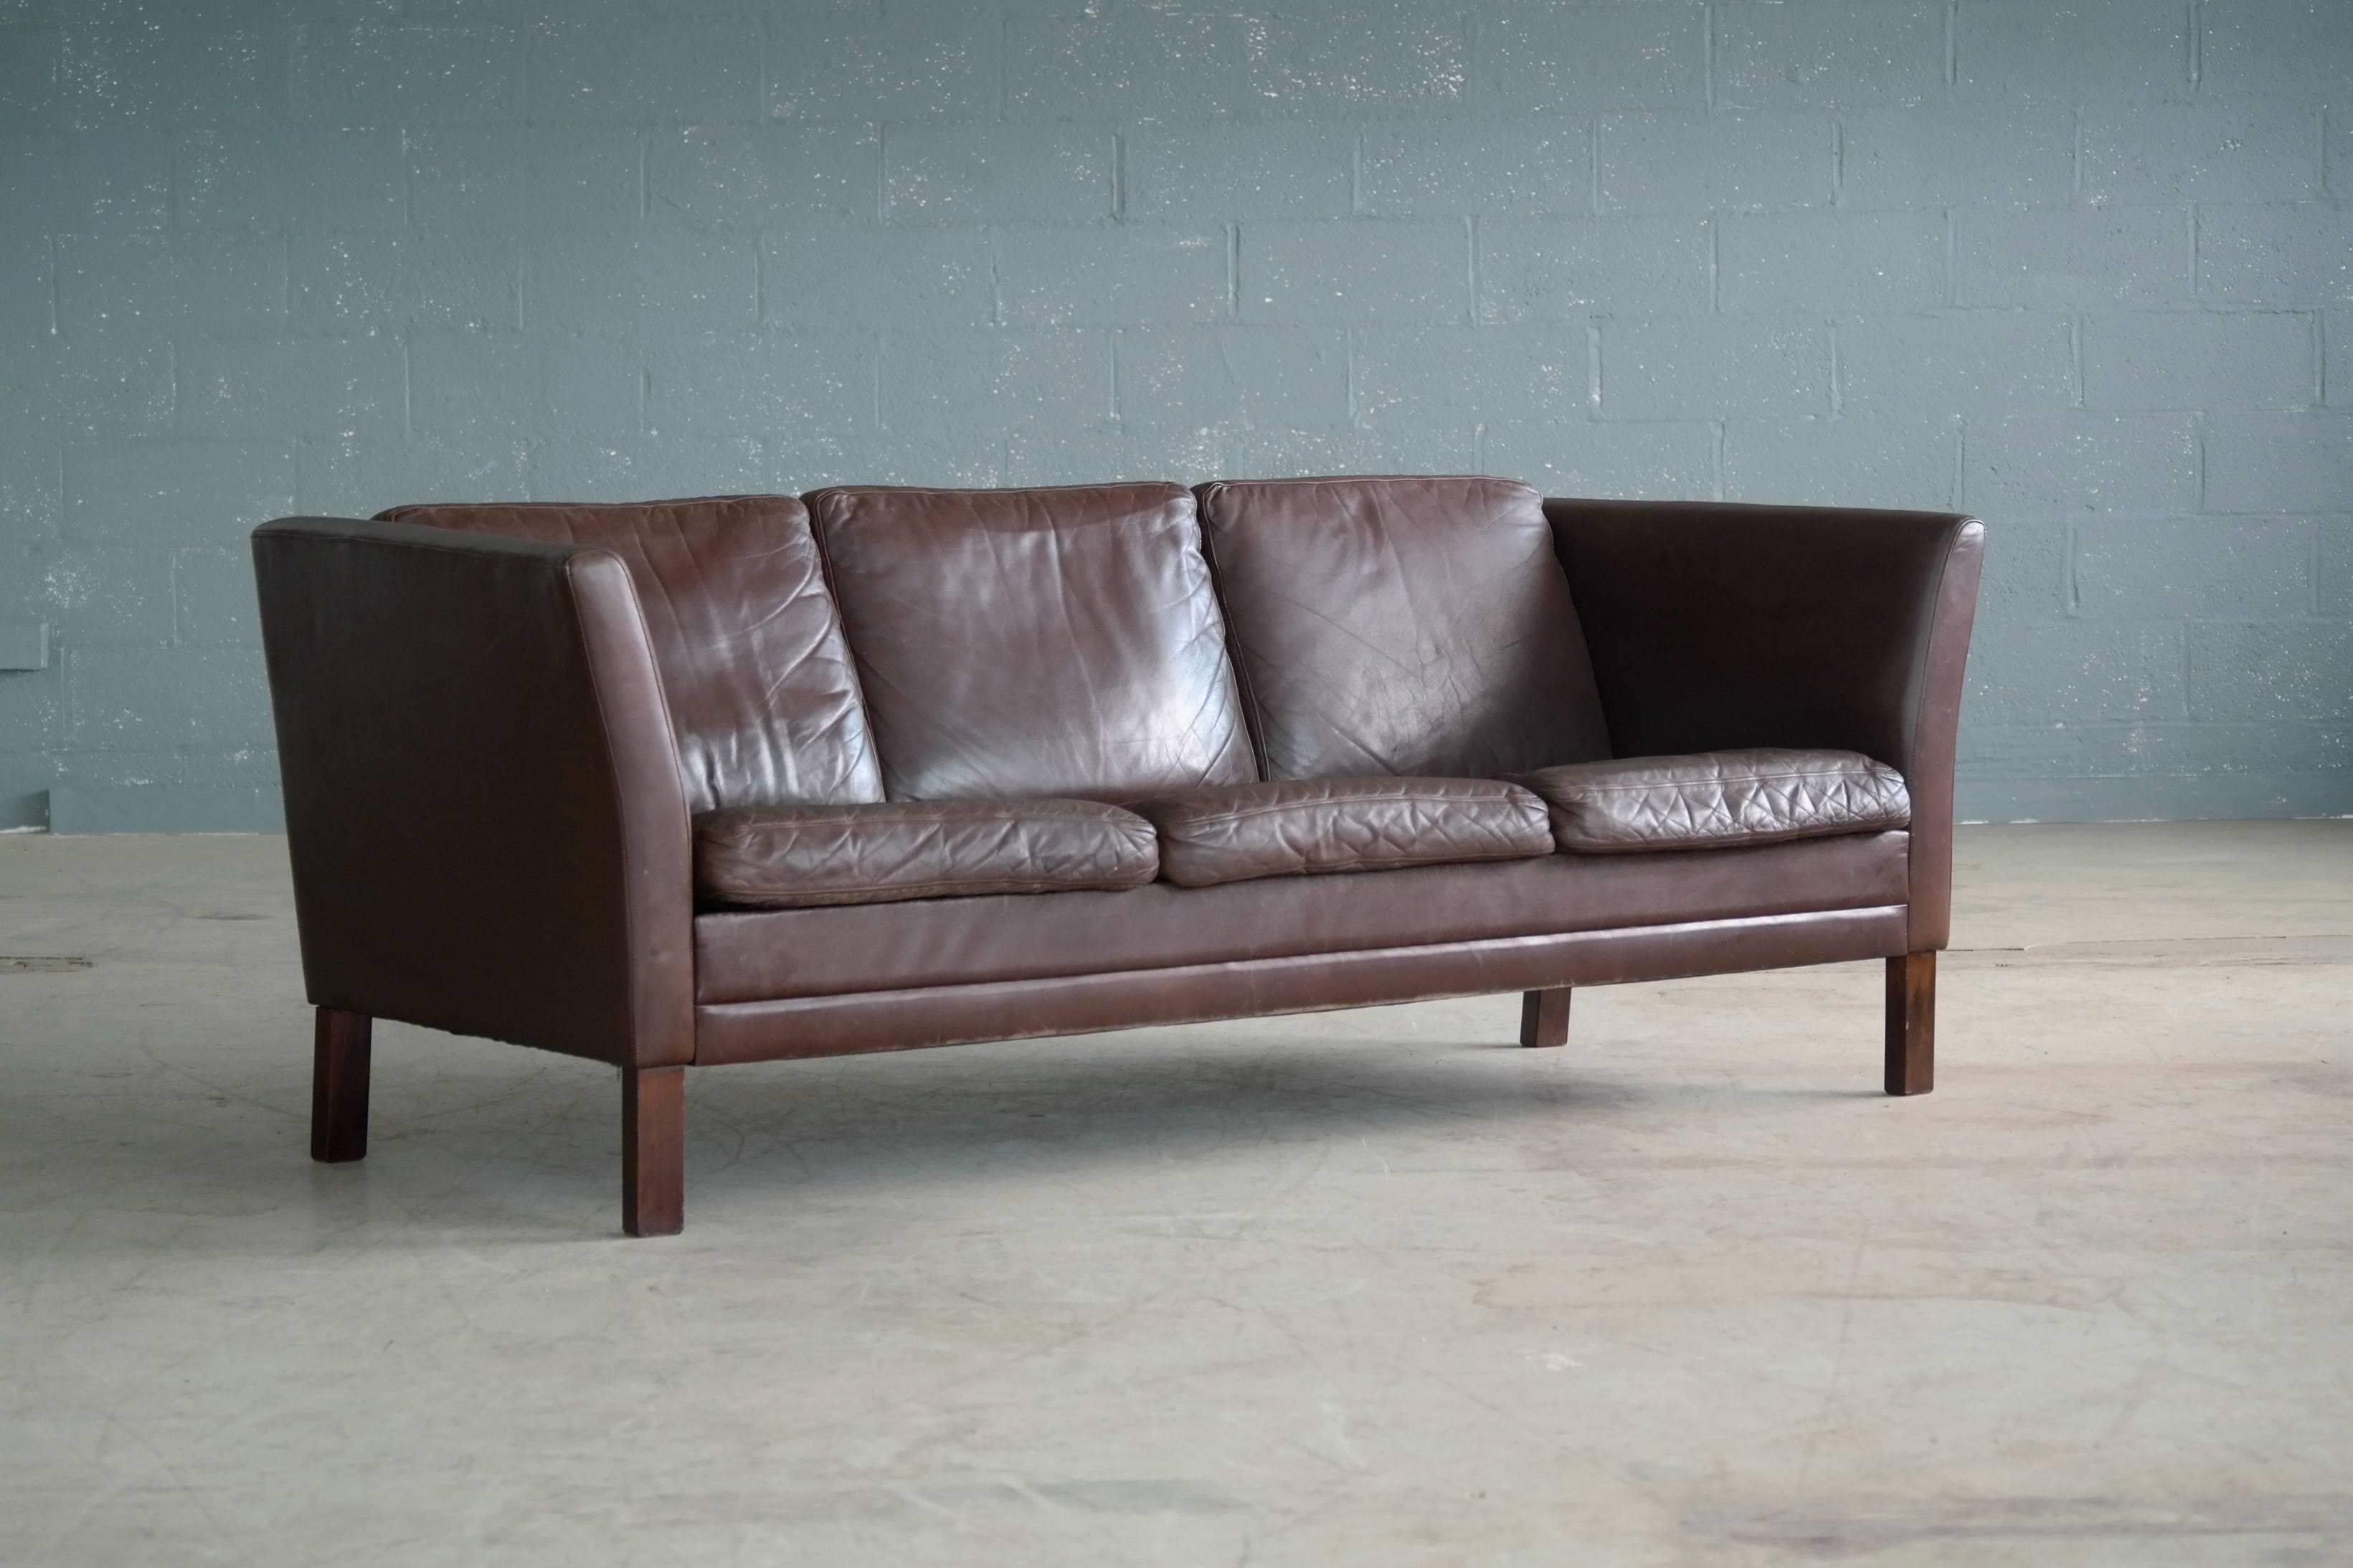 Great Borge Mogensen style sofa in supple chocolate colored leather by Mogens Hansen. Designed in 1971 and likely manufactured sometime in the 1970s. Nice patina with some minor scuffing and scratches. Classic Danish.